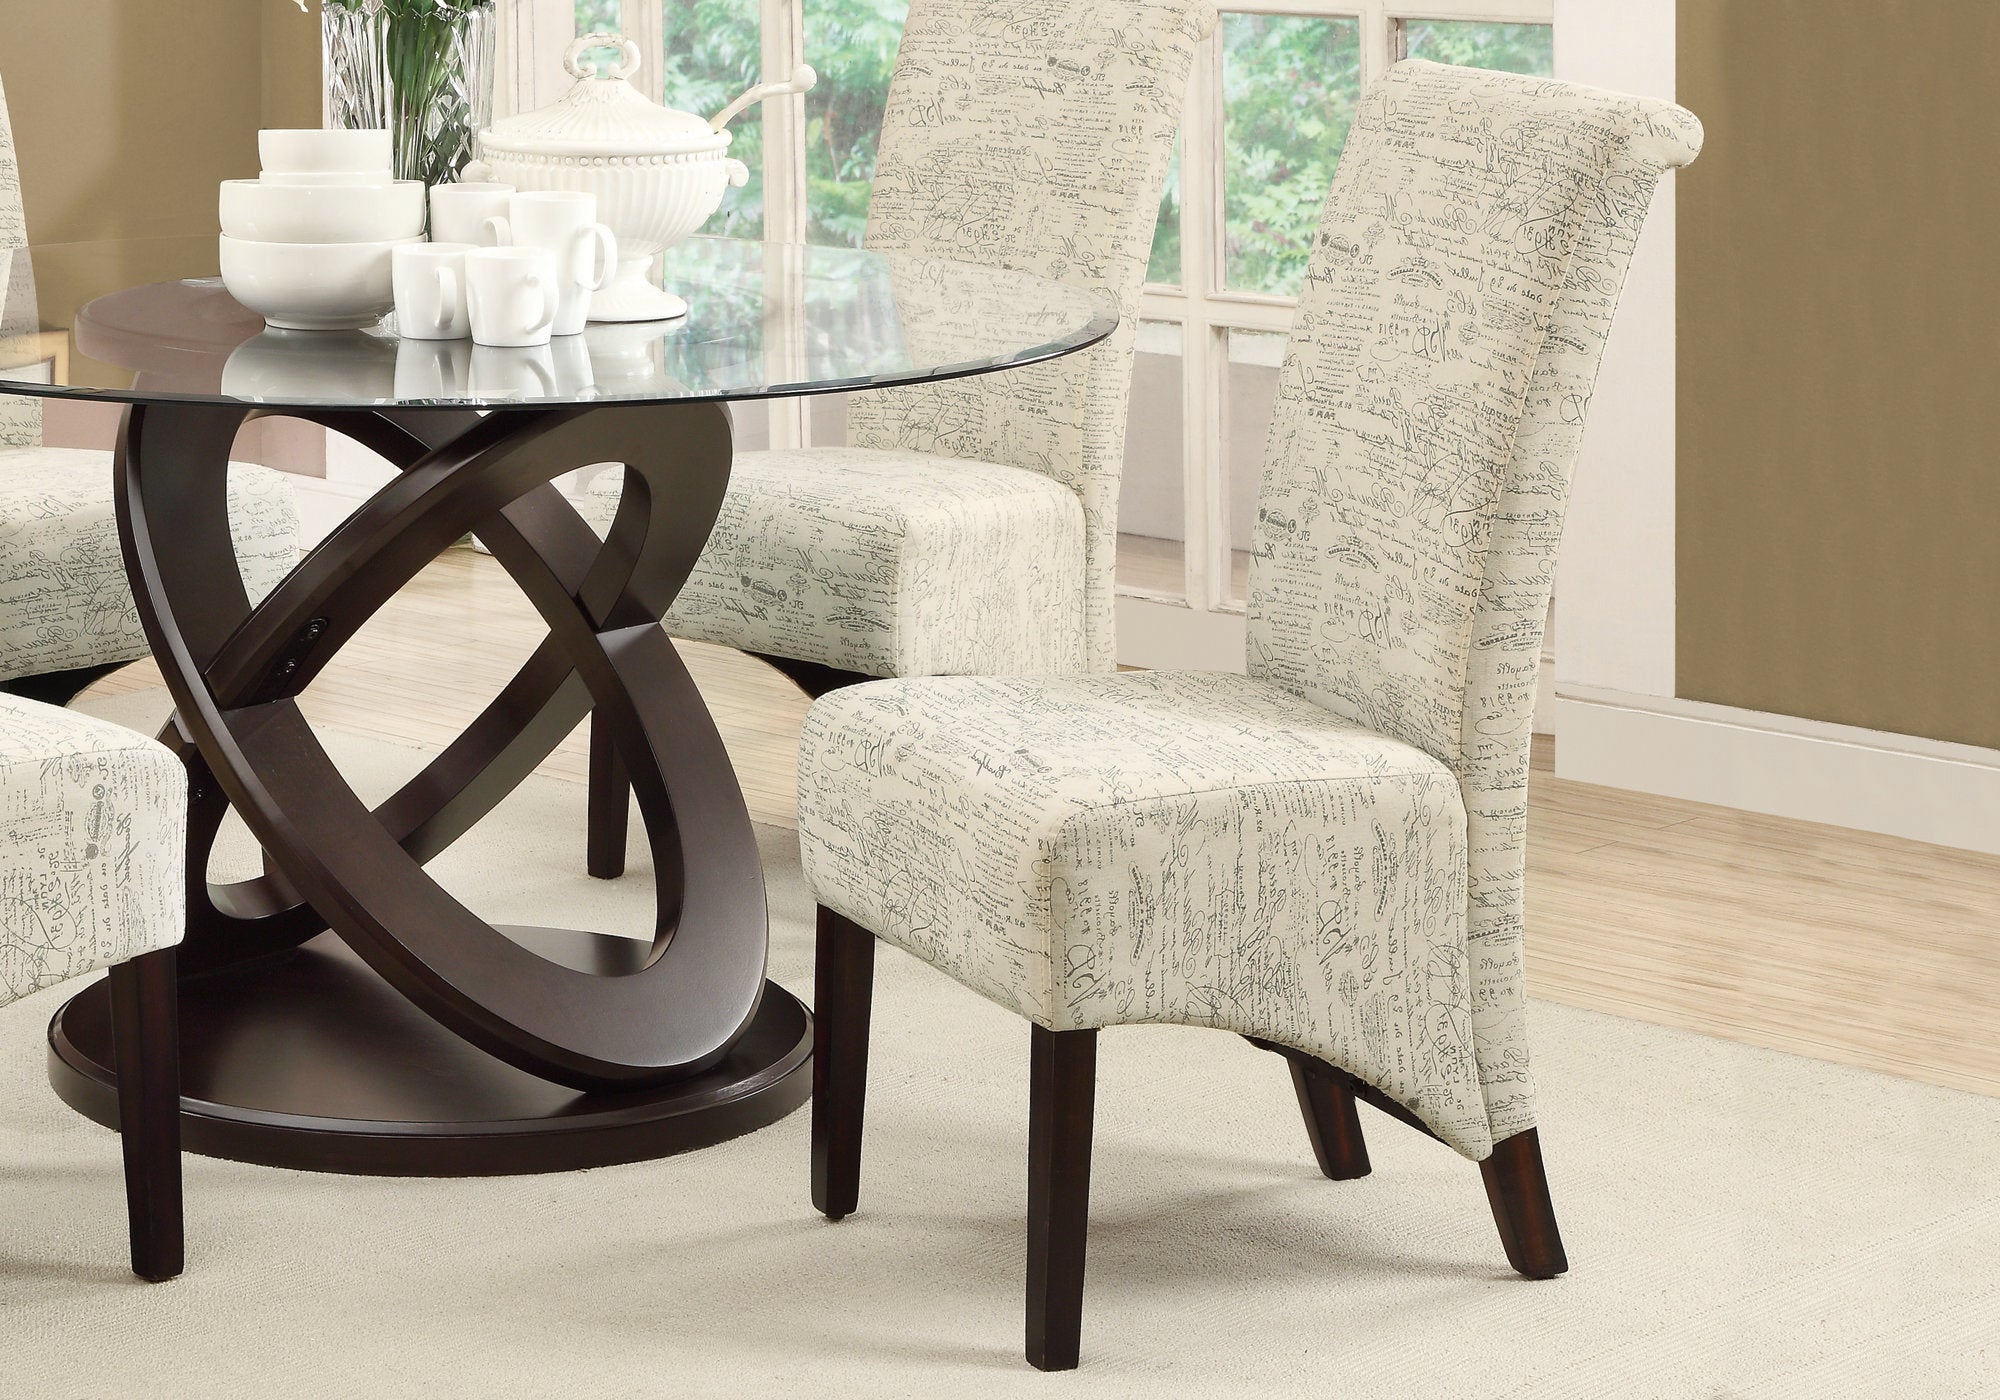 MN-401790FR    Dining Chair, Set Of 2, Side, Fabric, Upholstered, Wood Legs, Kitchen, Dining Room, Linen Look Fabric, Wooden Legs, Beige, Black, Contemporary, Modern